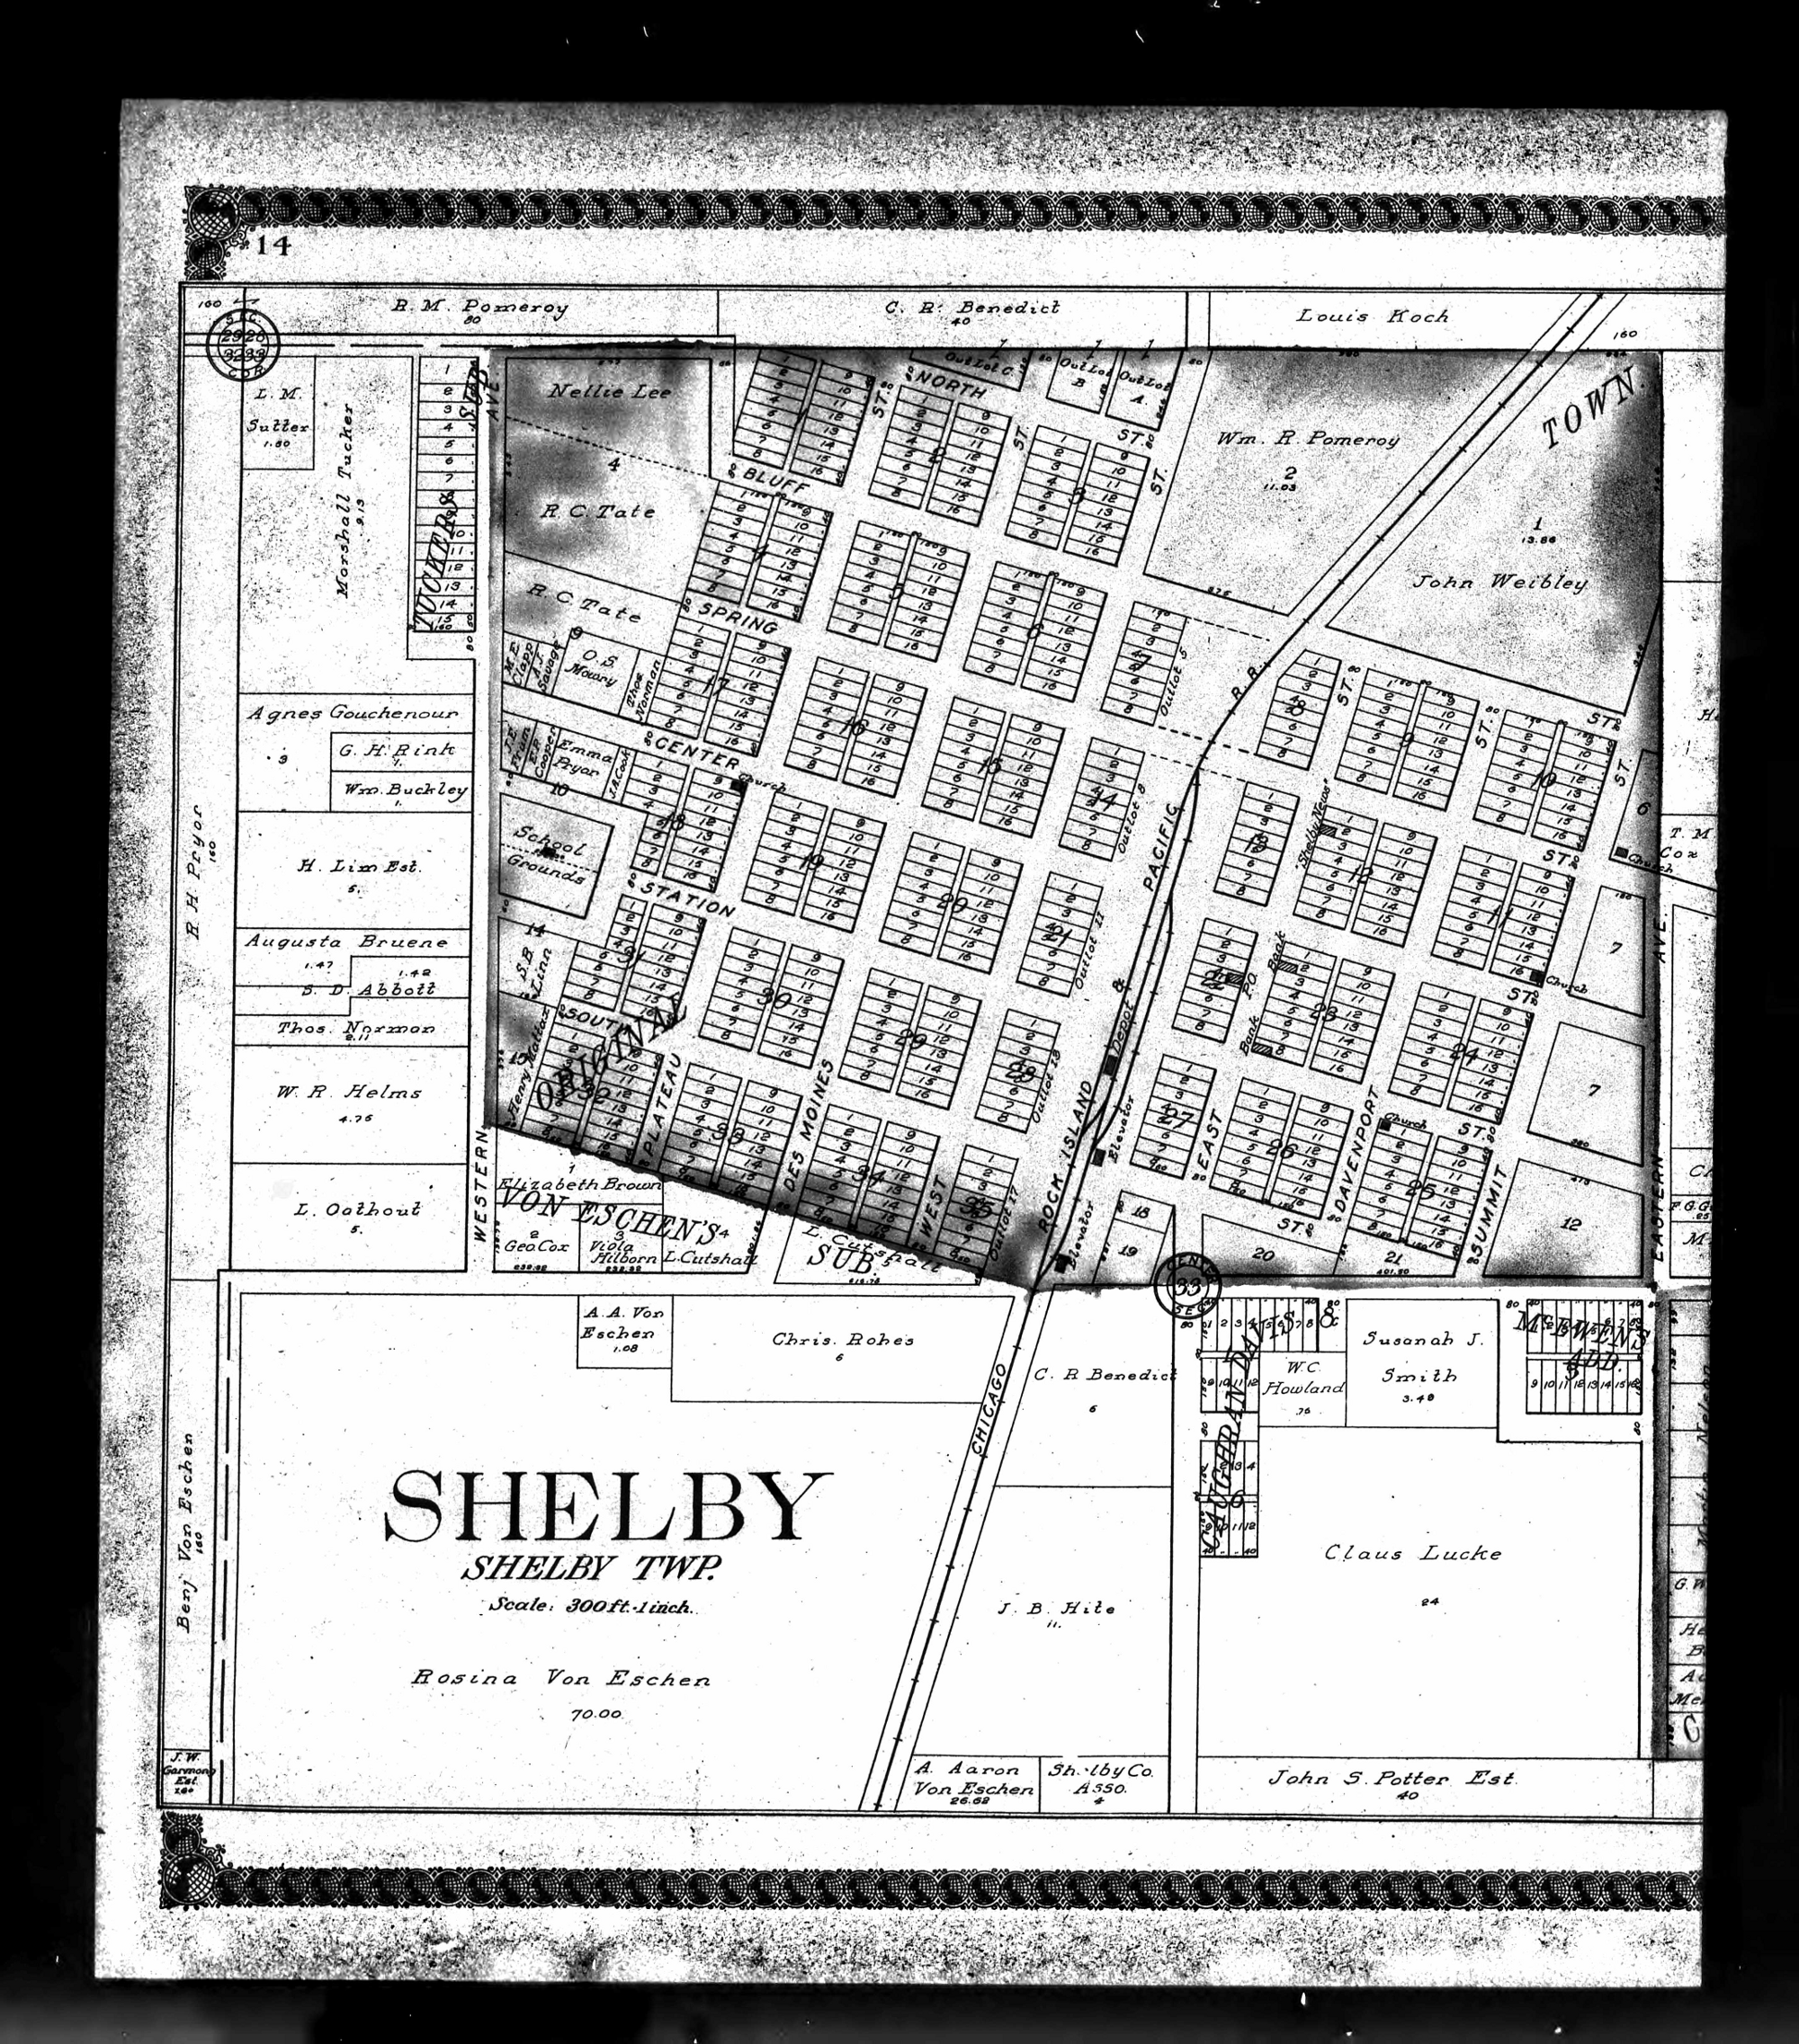 1911 Atlas of Shelby Township